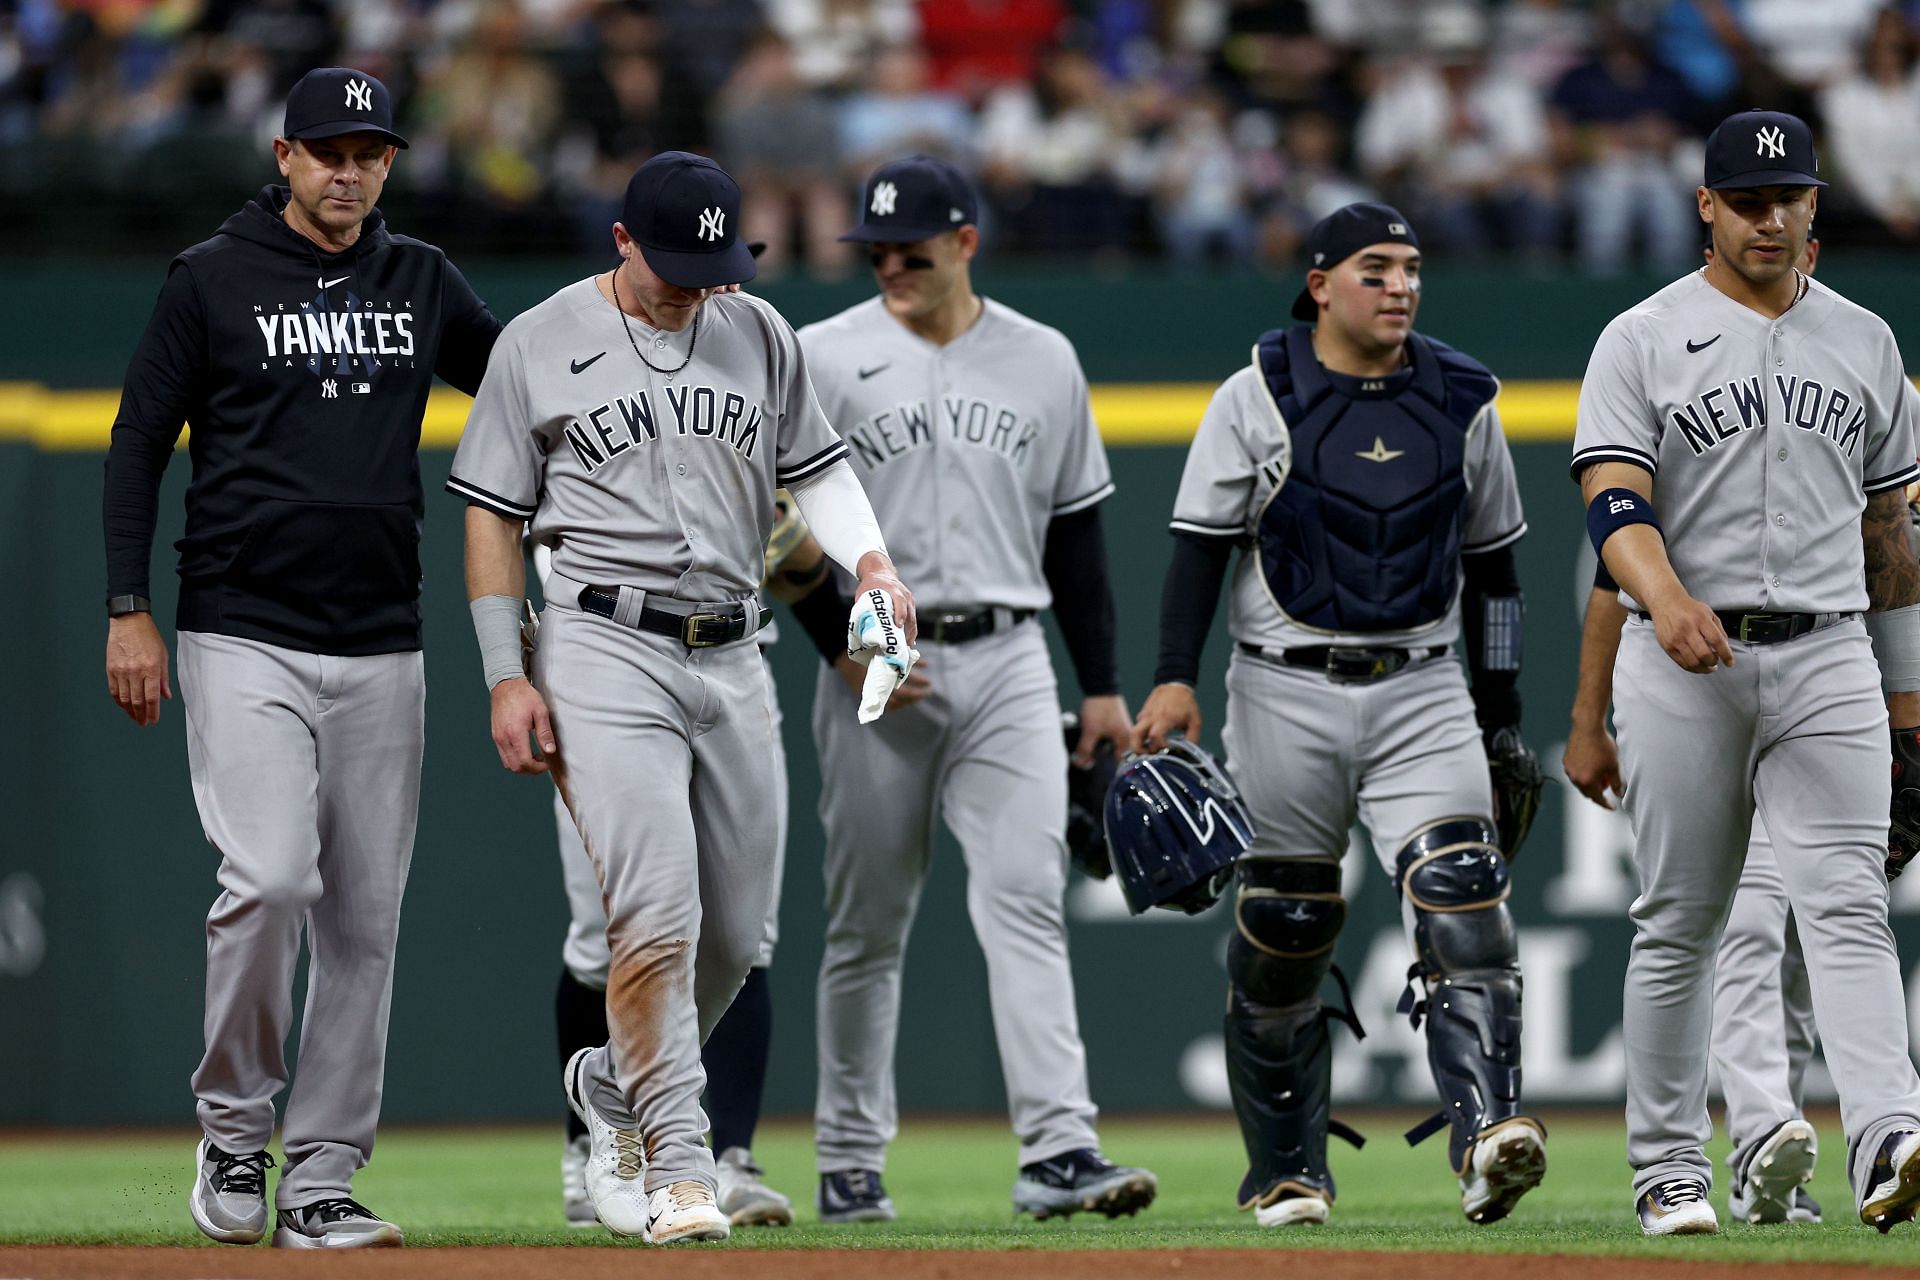 New York Yankees fans agitated as team reveals sponsored jersey